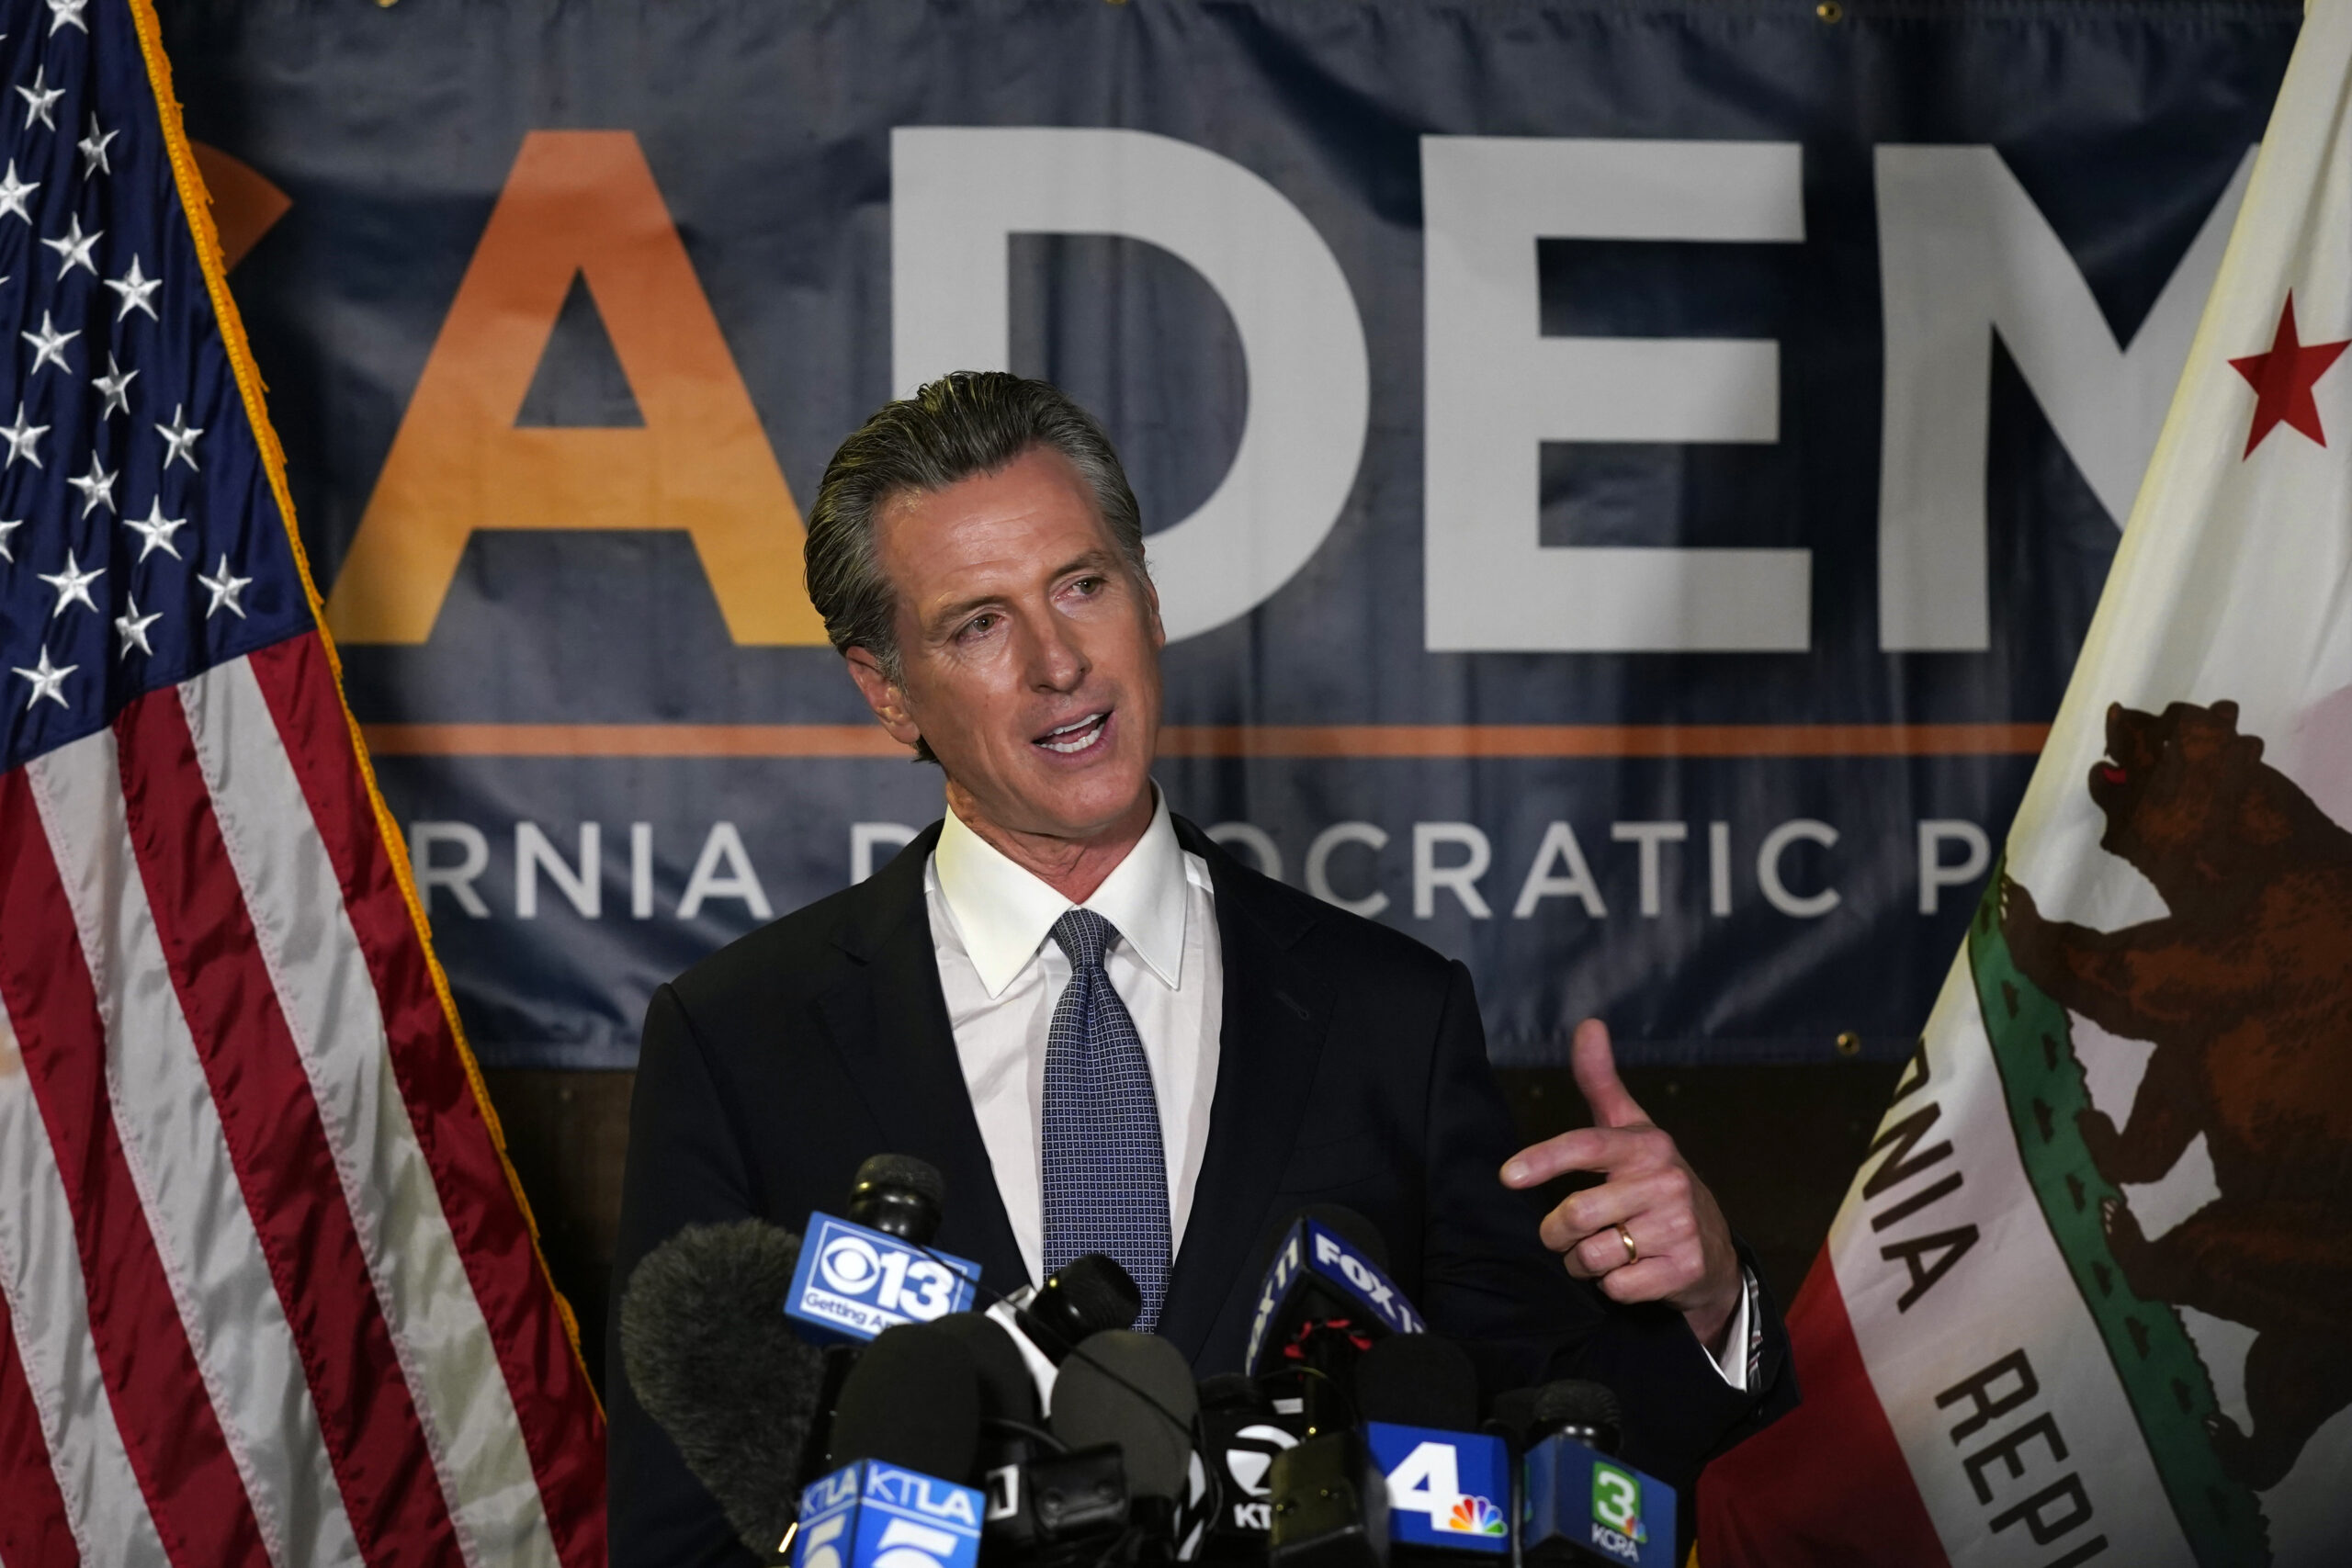 FILE - California Gov. Gavin Newsom addresses reporters after beating back the recall that aimed to remove him from office, at the John L. Burton California Democratic Party headquarters in Sacramento, Calif., Tuesday, Sept. 14, 2021. Newsom on Saturday, Dec. 11 pledged to empower private citizens to enforce a ban on the manufacture and sale assault weapons in the state, citing the same authority claimed by conservative lawmakers in Texas to outlaw most abortions once a heartbeat is detected. (AP Photo/Rich Pedroncelli, File)